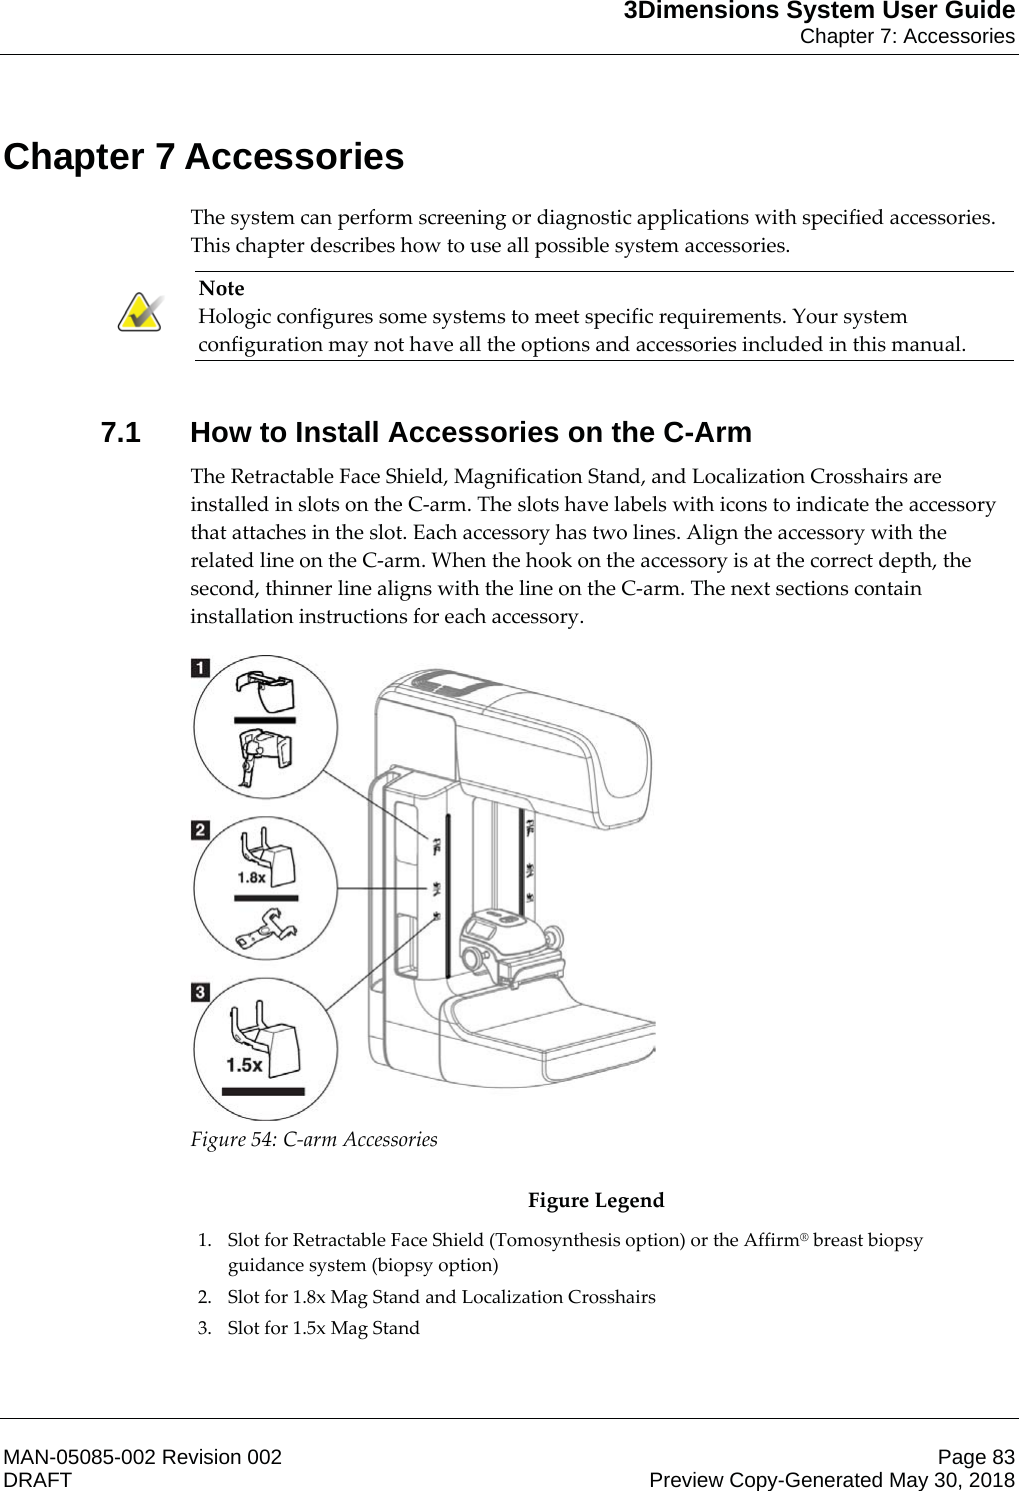 3Dimensions System User GuideChapter 7: AccessoriesMAN-05085-002 Revision 002 Page 83DRAFT Preview Copy-Generated May 30, 20187: AccessoriesThe system can perform screening or diagnostic applications with specified accessories. This chapter describes how to use all possible system accessories. Note Hologic configures some systems to meet specific requirements. Your system configuration may not have all the options and accessories included in this manual.    7.1 How to Install Accessories on the C-ArmThe Retractable Face Shield, Magnification Stand, and Localization Crosshairs are installed in slots on the C-arm. The slots have labels with icons to indicate the accessory that attaches in the slot. Each accessory has two lines. Align the accessory with the related line on the C-arm. When the hook on the accessory is at the correct depth, the second, thinner line aligns with the line on the C-arm. The next sections contain installation instructions for each accessory.  Figure 54: C-arm Accessories  Figure Legend 1. Slot for Retractable Face Shield (Tomosynthesis option) or the Affirm® breast biopsy guidance system (biopsy option) 2. Slot for 1.8x Mag Stand and Localization Crosshairs 3. Slot for 1.5x Mag Stand Chapter 7